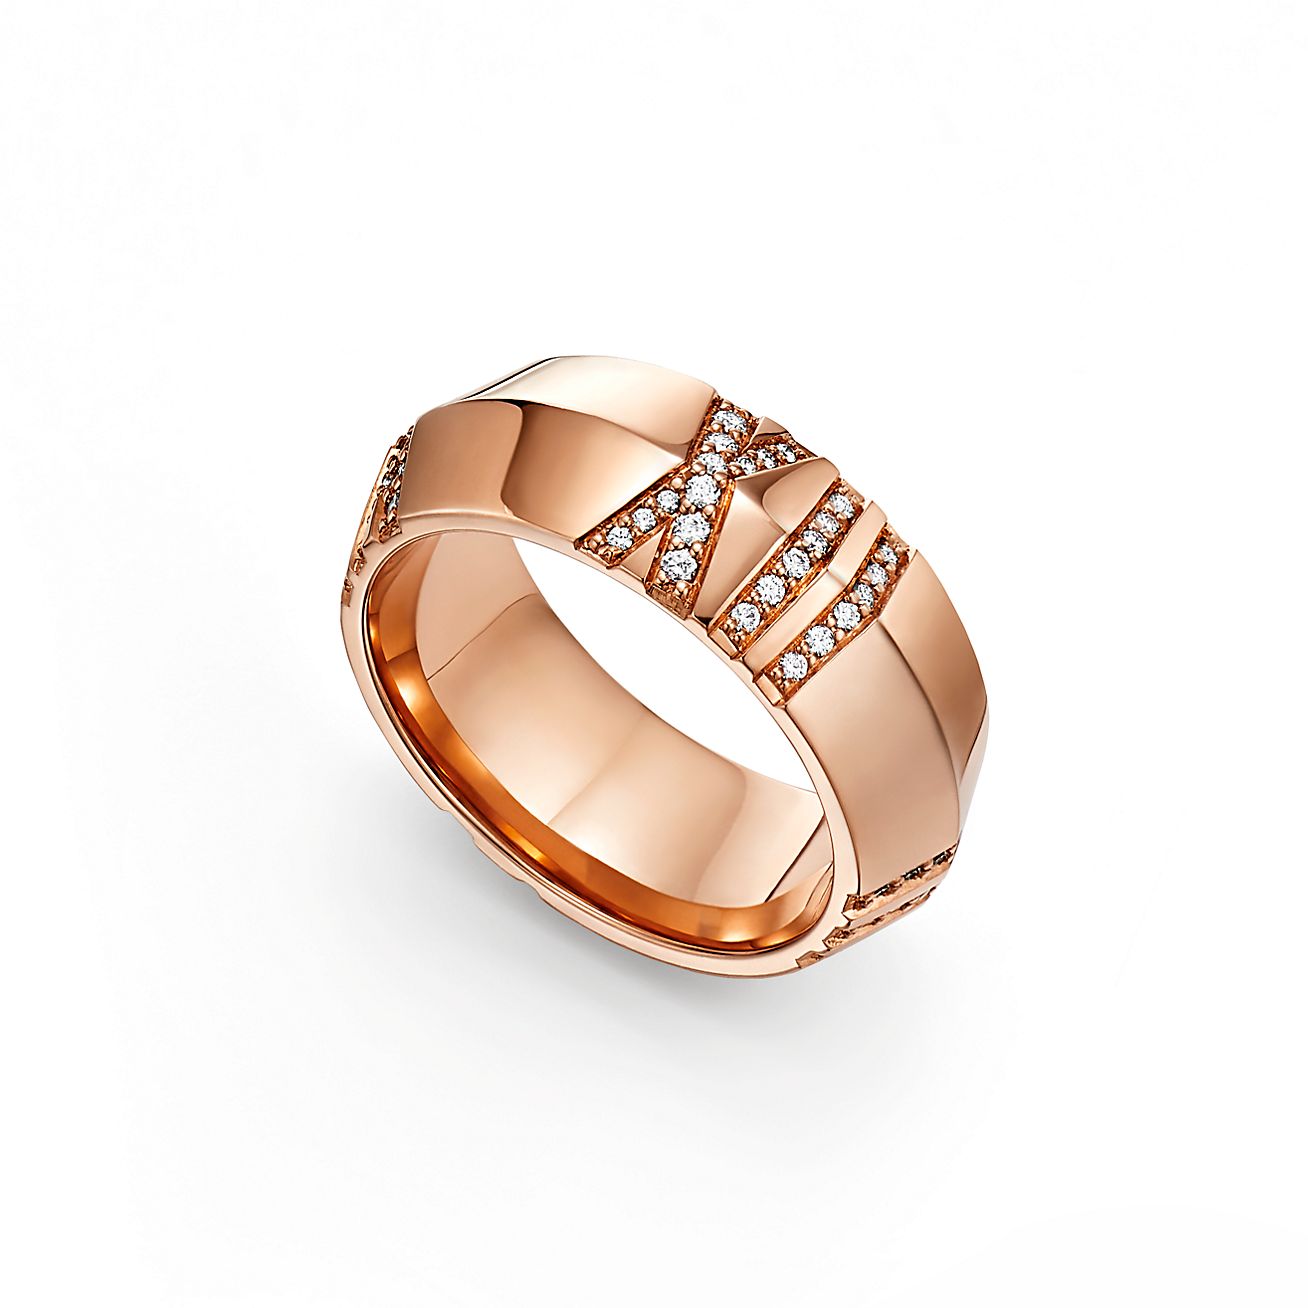 Atlas® X Closed Wide Ring in Rose Gold with Diamonds, 7.5 mm